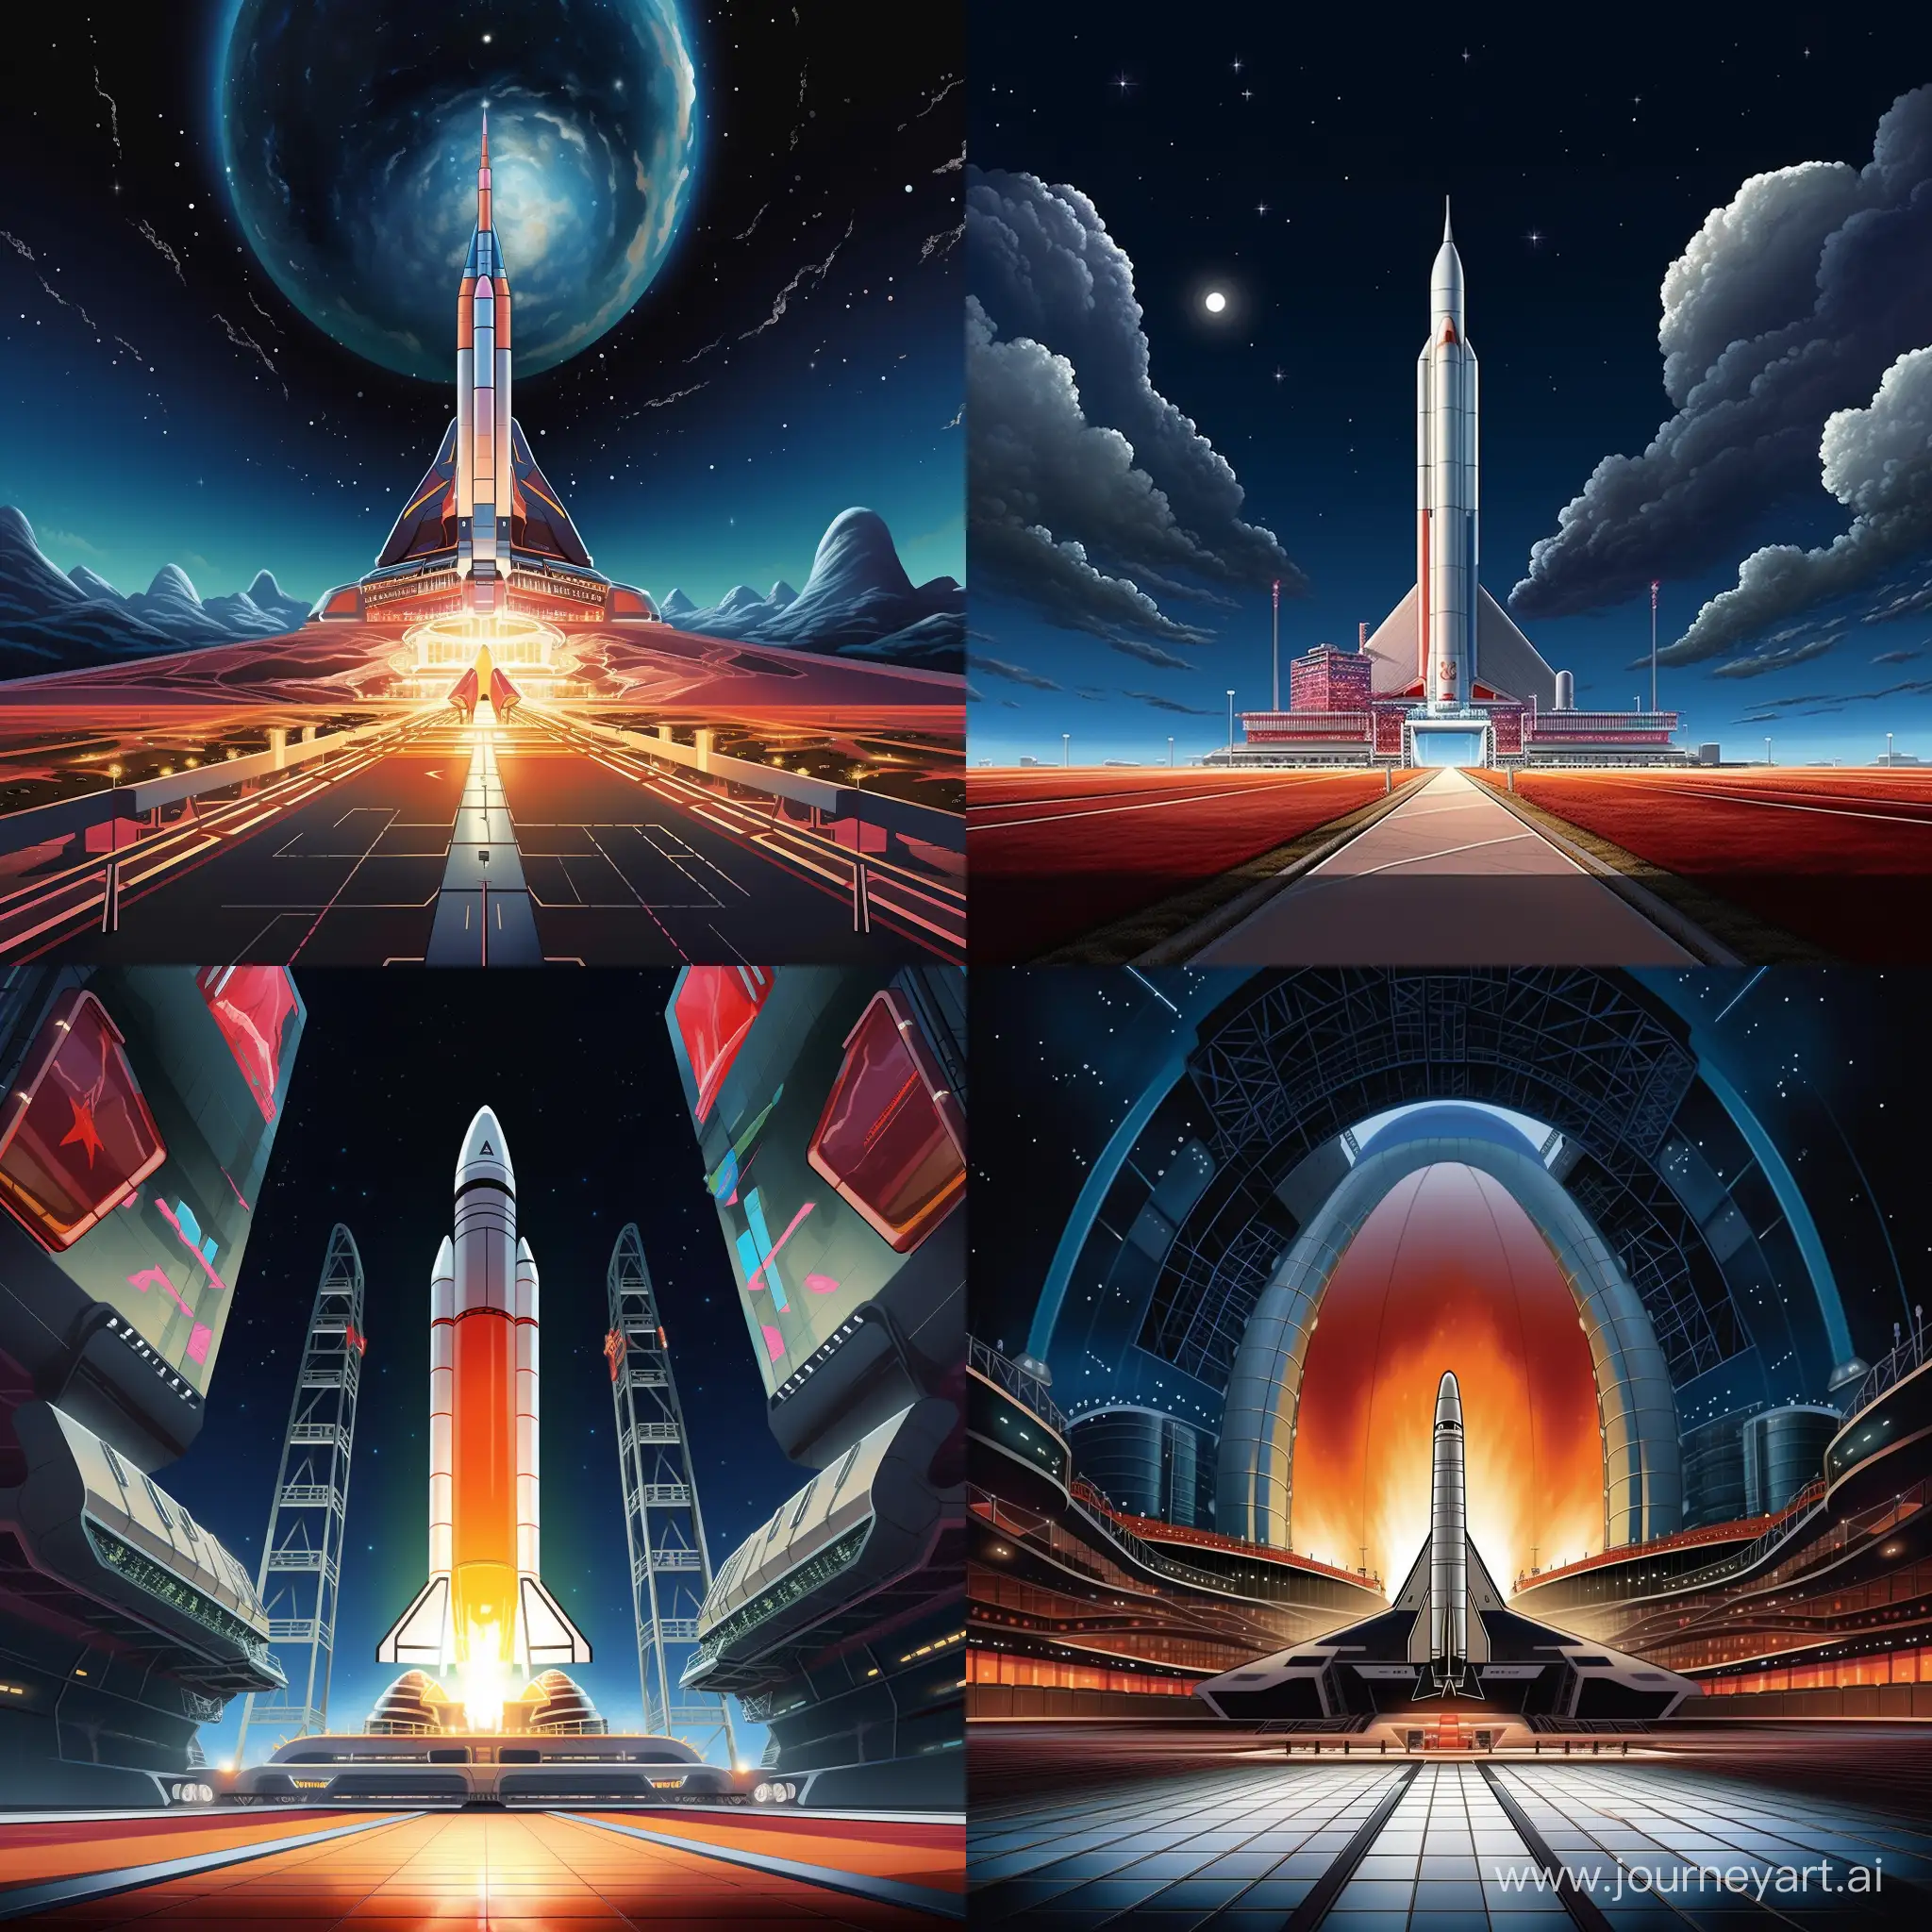 A rocket facility with a huge alcubierre drive based rocket on standby on the launchpad, breathtaking surreal visualization, Hiroshi Nagai aesthetic